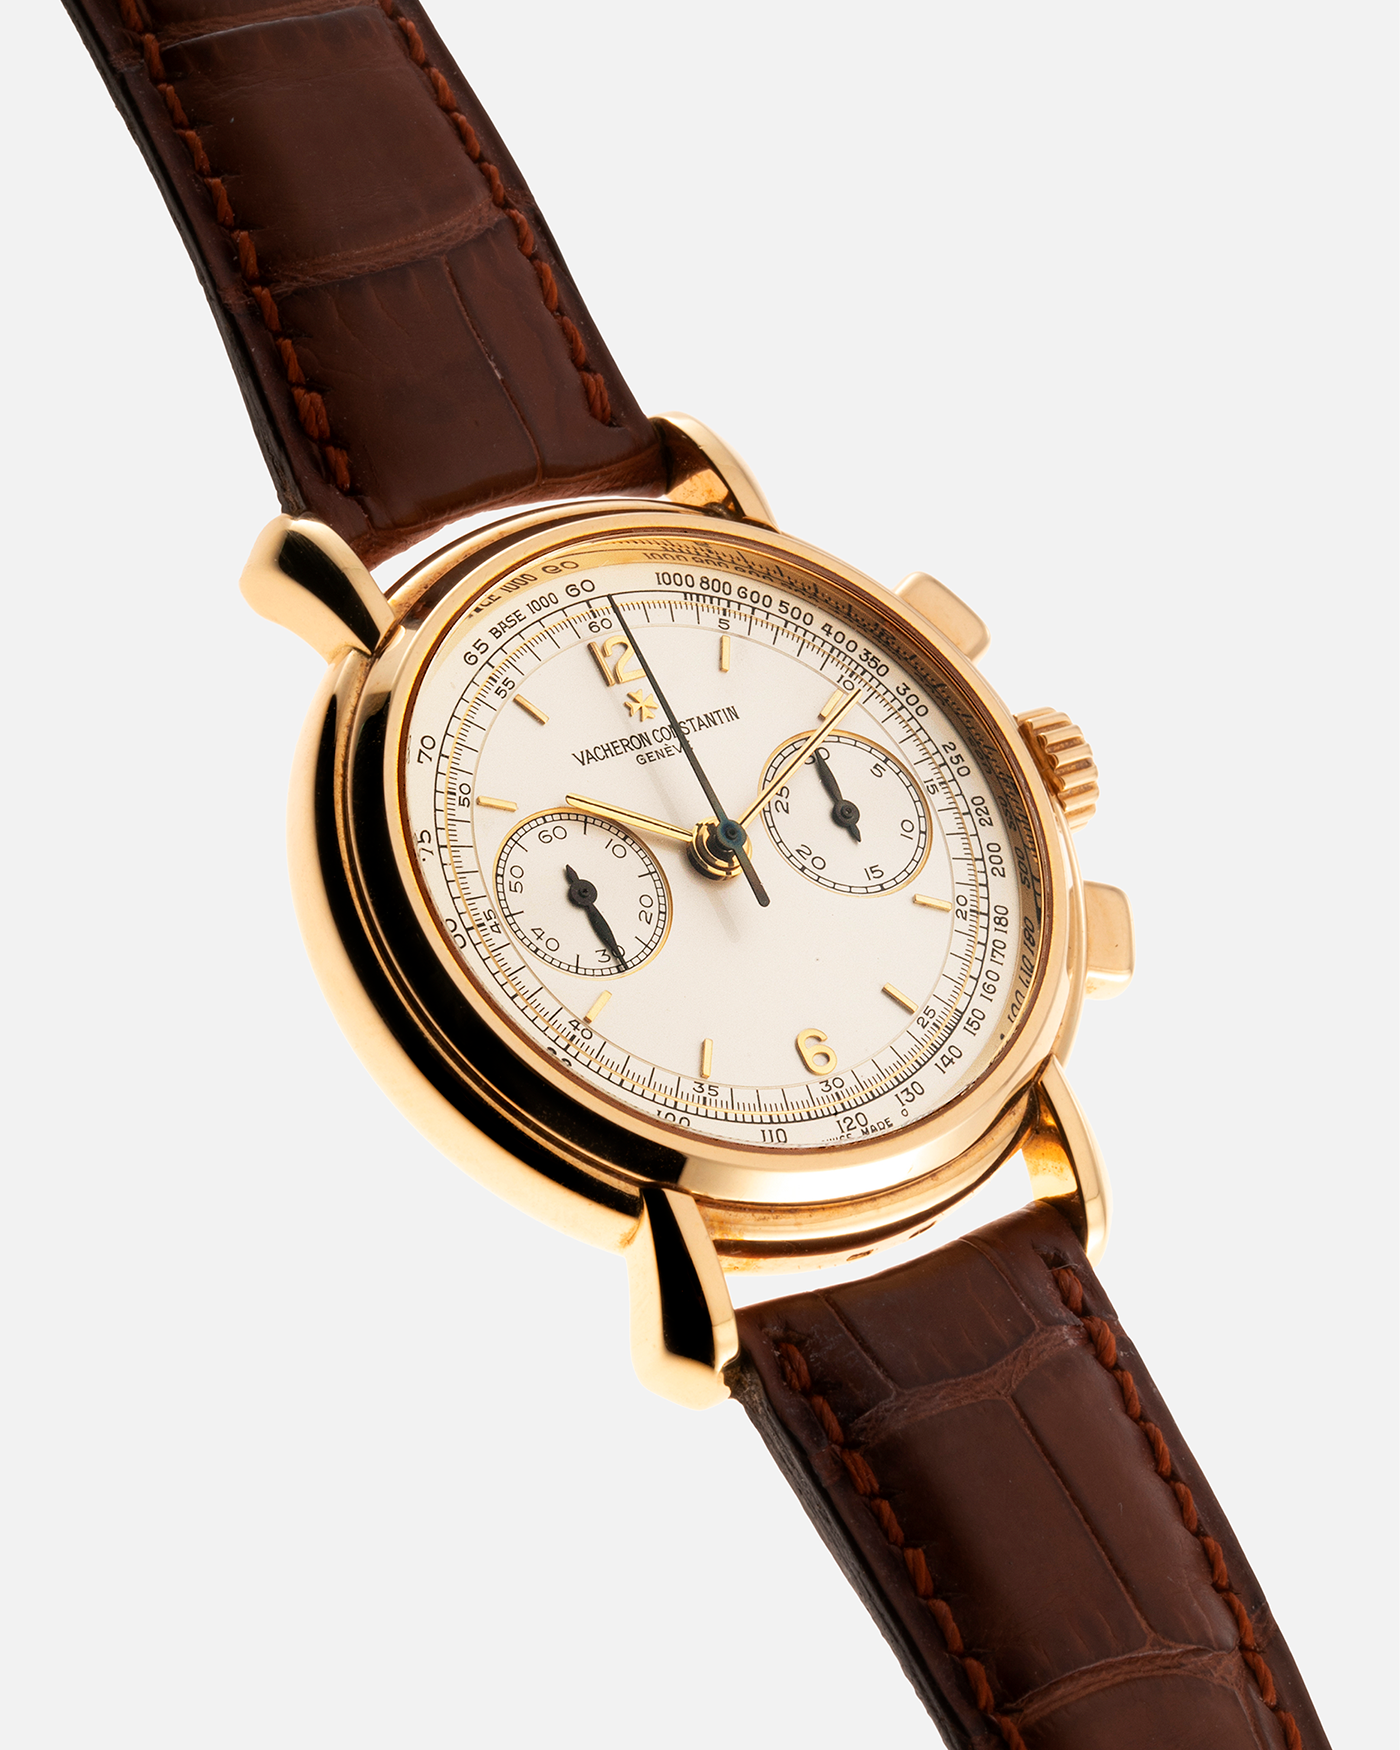 Brand: Vacheron Constantin Year: 2000’s Model: Les Historiques Chronograph Reference Number: 47101 Material: 18-carat Yellow Gold Movement: Lemania 2320 Based Cal. 1141 Case Diameter: 37mm Bracelet: Vacheron Constantin Alligator Brown Leather Strap with Signed 18-carat Yellow Gold Tang Buckle